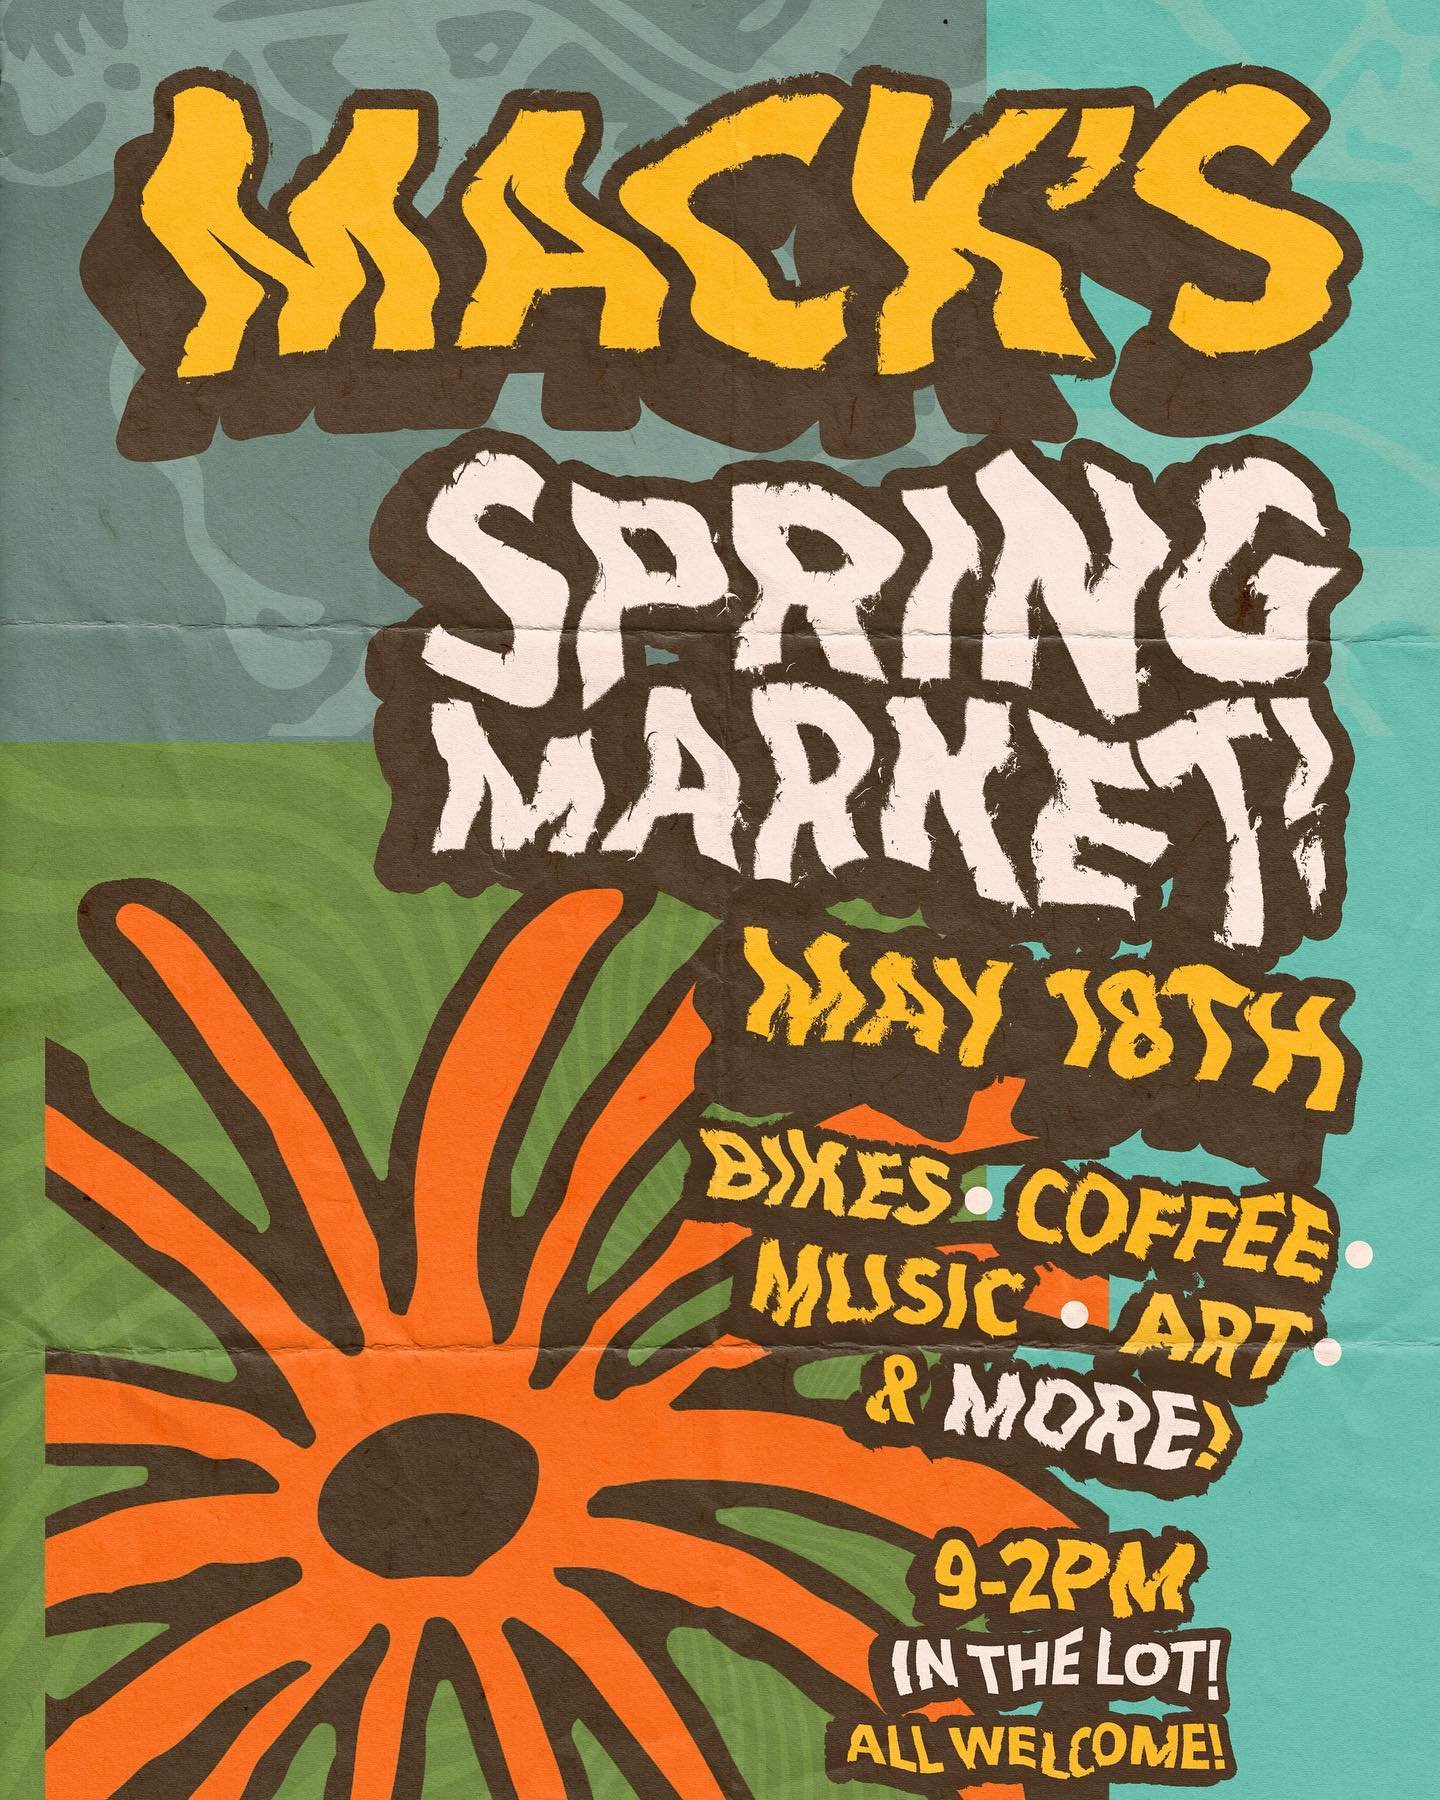 Our spring Mack&rsquo;s market is shaping up to be a good one! 
Vendors with bike stuff, music, art, vintage, bikes! 

Like a street market in our lot! 

Free Free Free 

All welcome 

May 18th 9-2 in the lot! 

For vendor tables please email Kelly@m